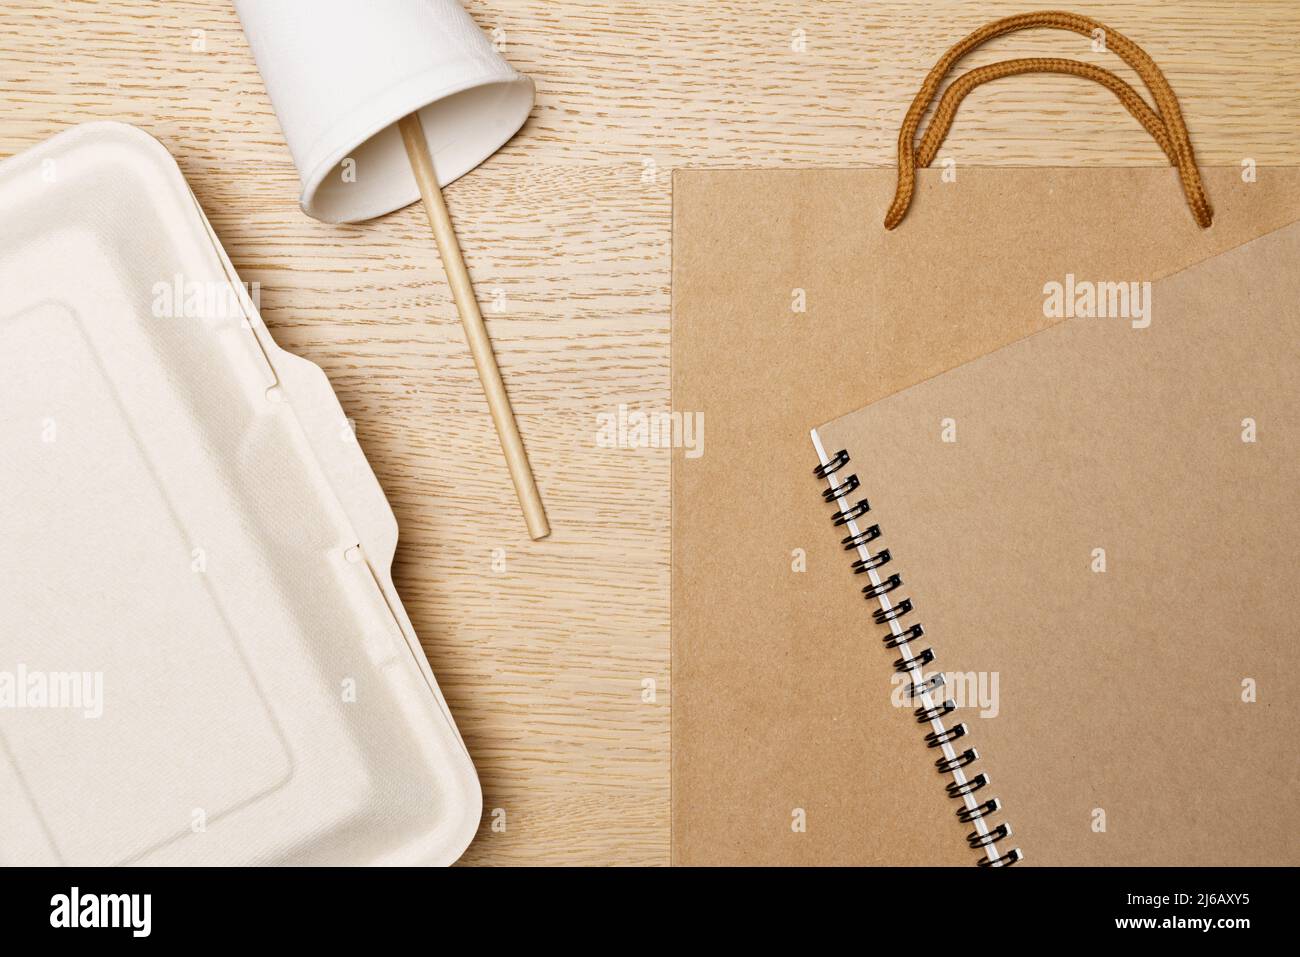 Eco friendly concept, Food box paper cup paper bag and notebook made from natural fiber. Stock Photo